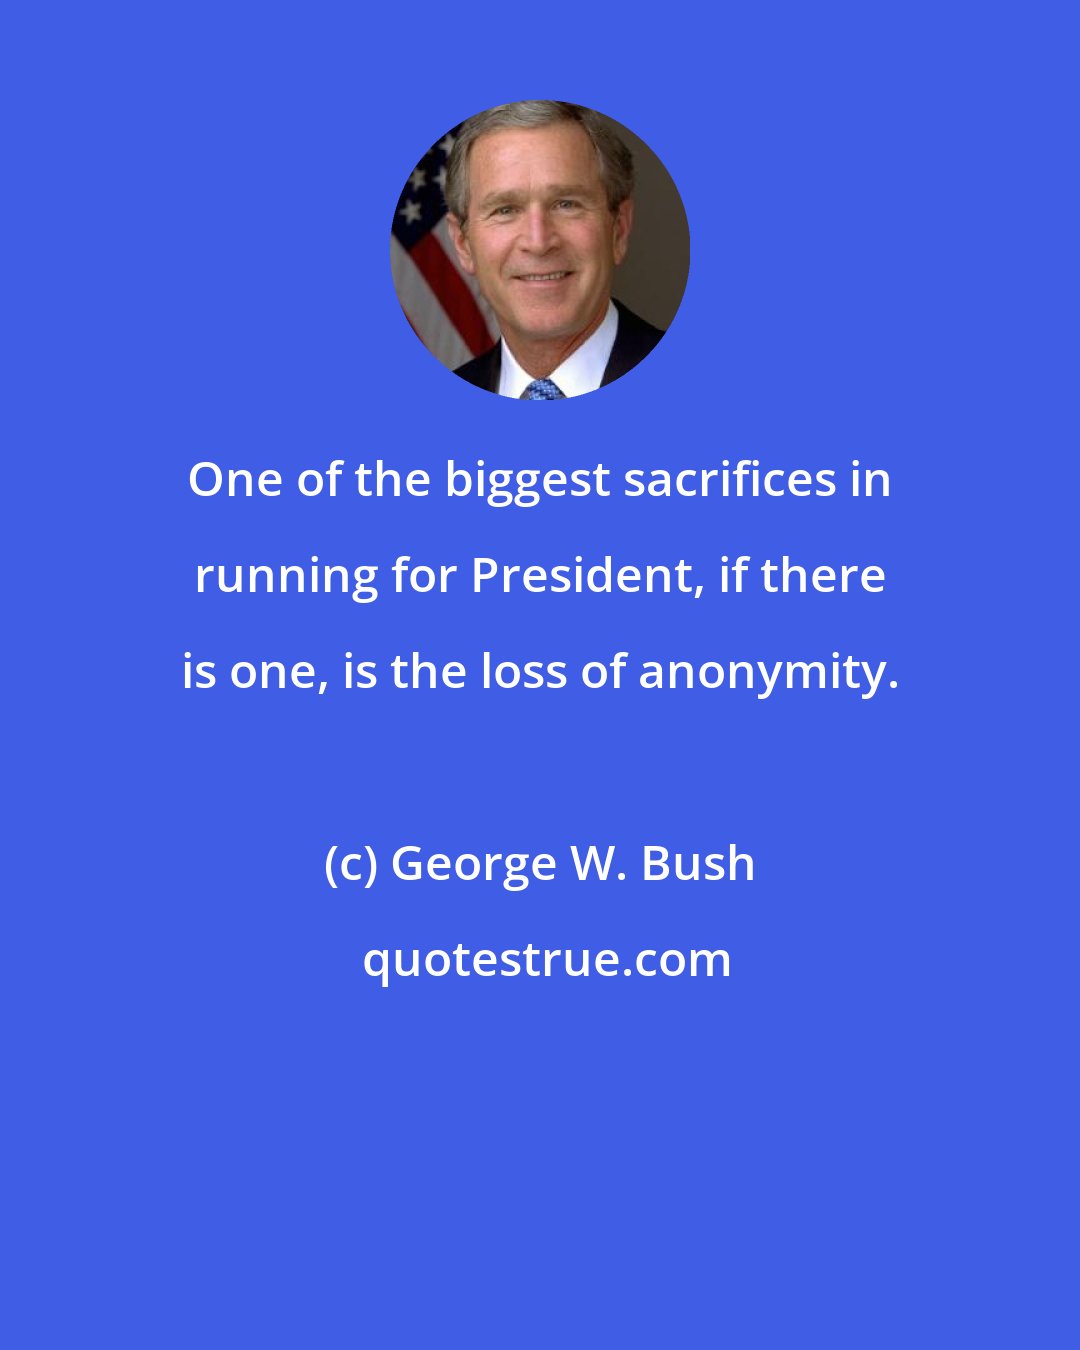 George W. Bush: One of the biggest sacrifices in running for President, if there is one, is the loss of anonymity.